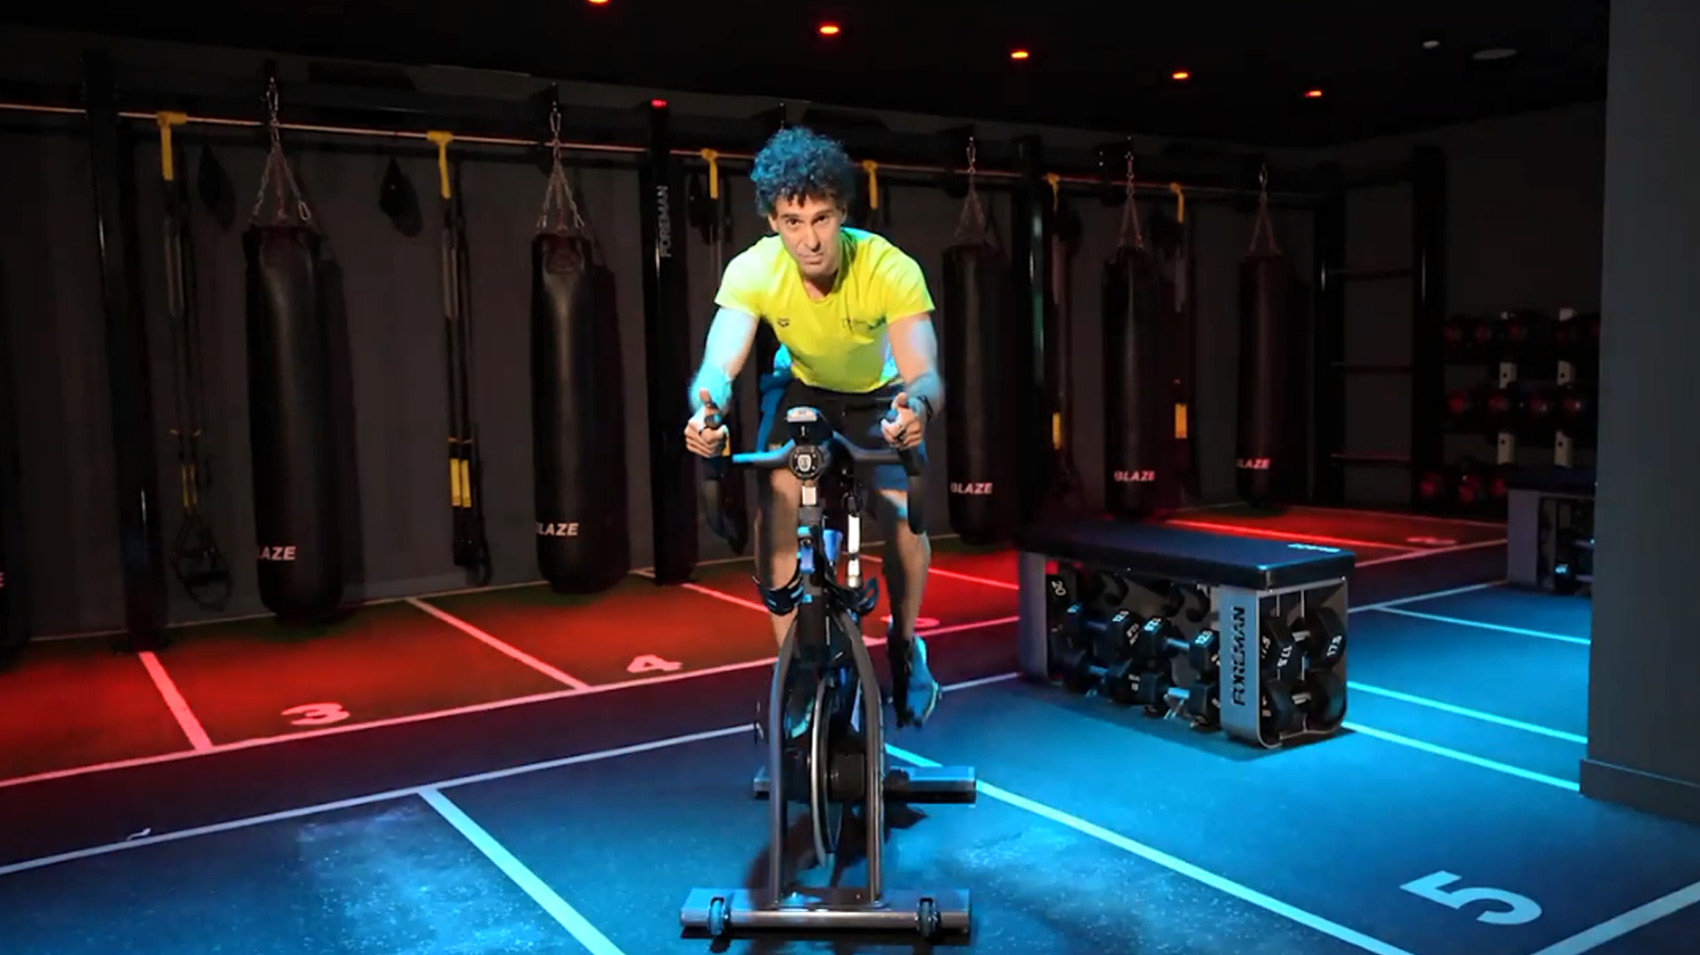 Indoor cycling: tips for effective and safe training - Video